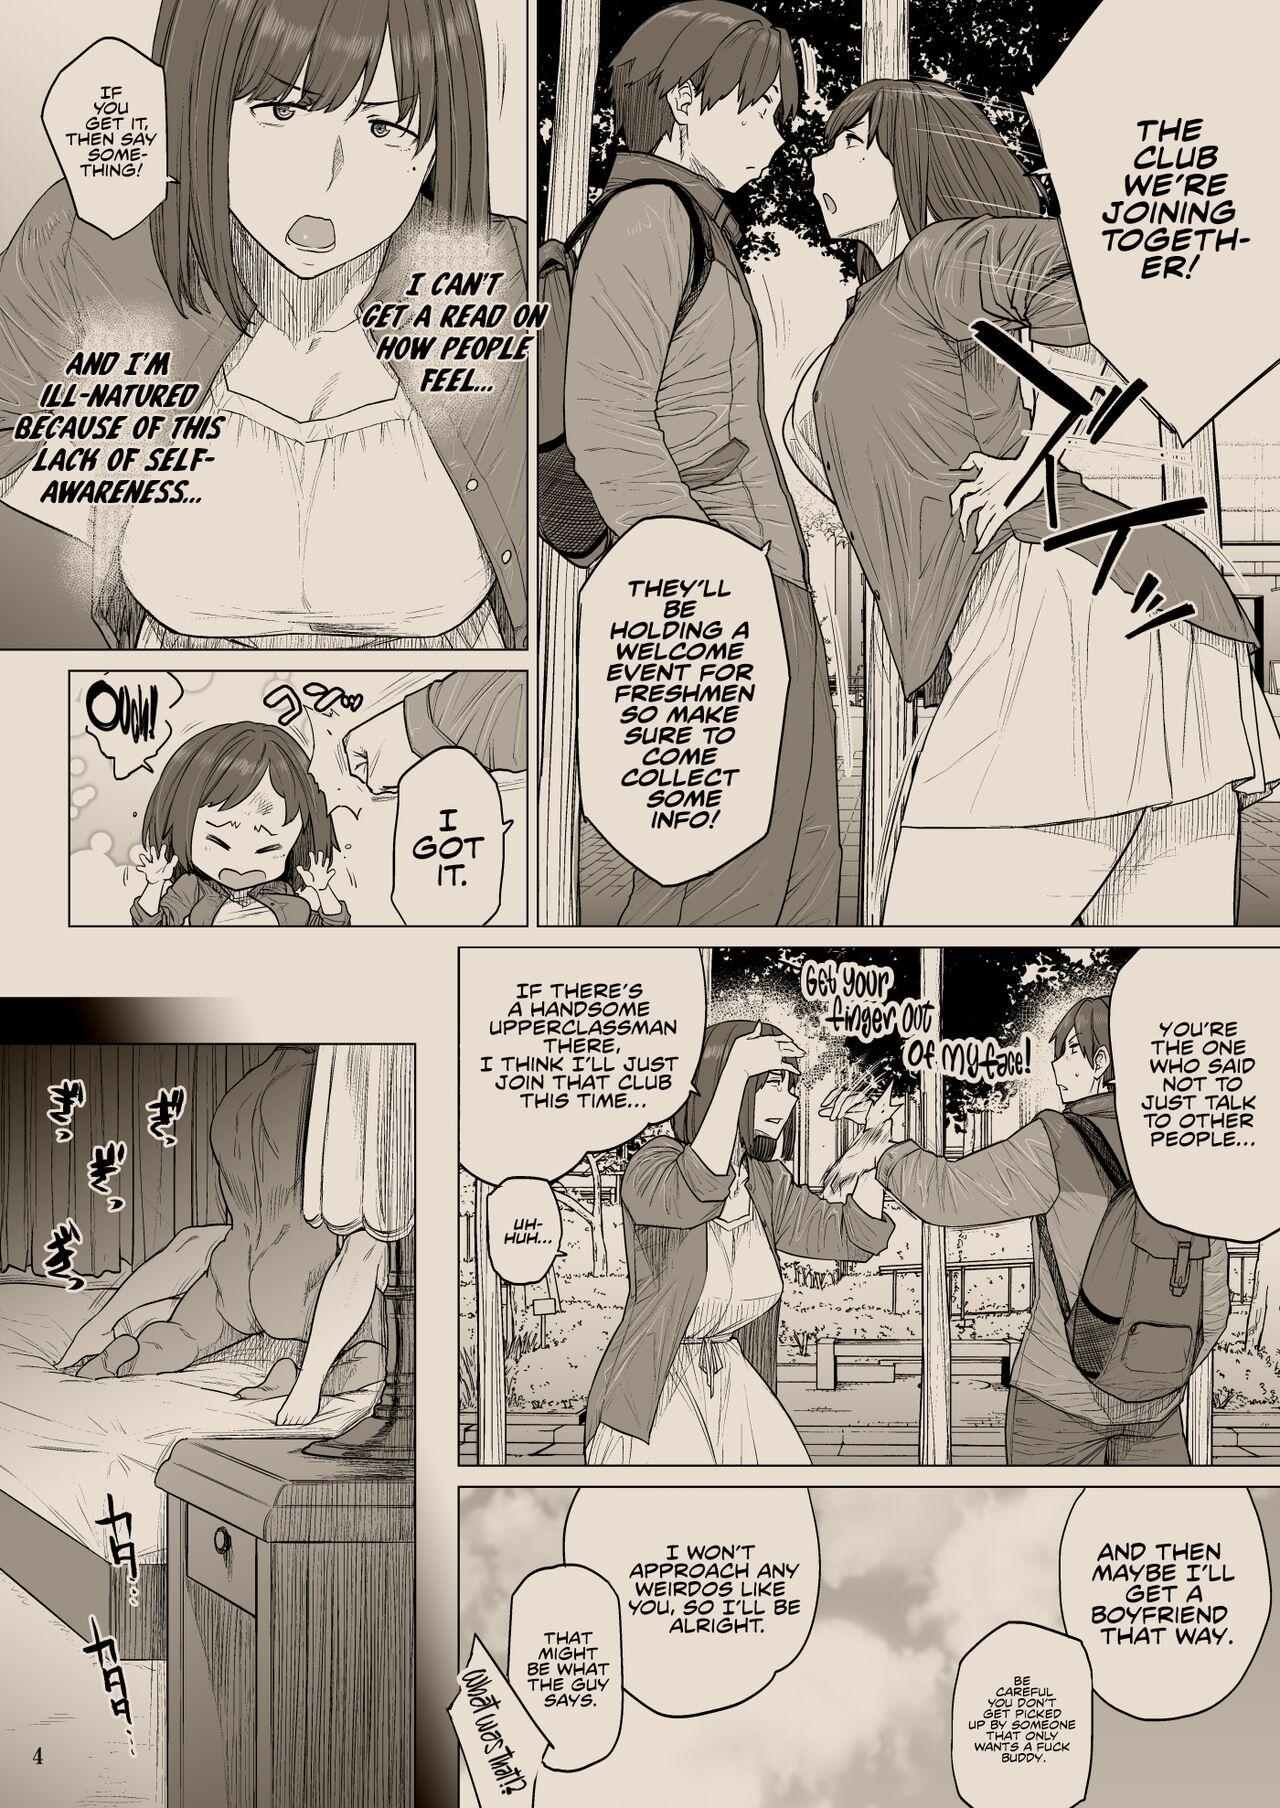 Blows B.S.S.² - My Smart, Beautiful Childhood Friend That I Loved First Became an Assistant of an Upperclassman’s Club and He Did Whatever He Pleased to Her - Original Amateur Cum - Page 3